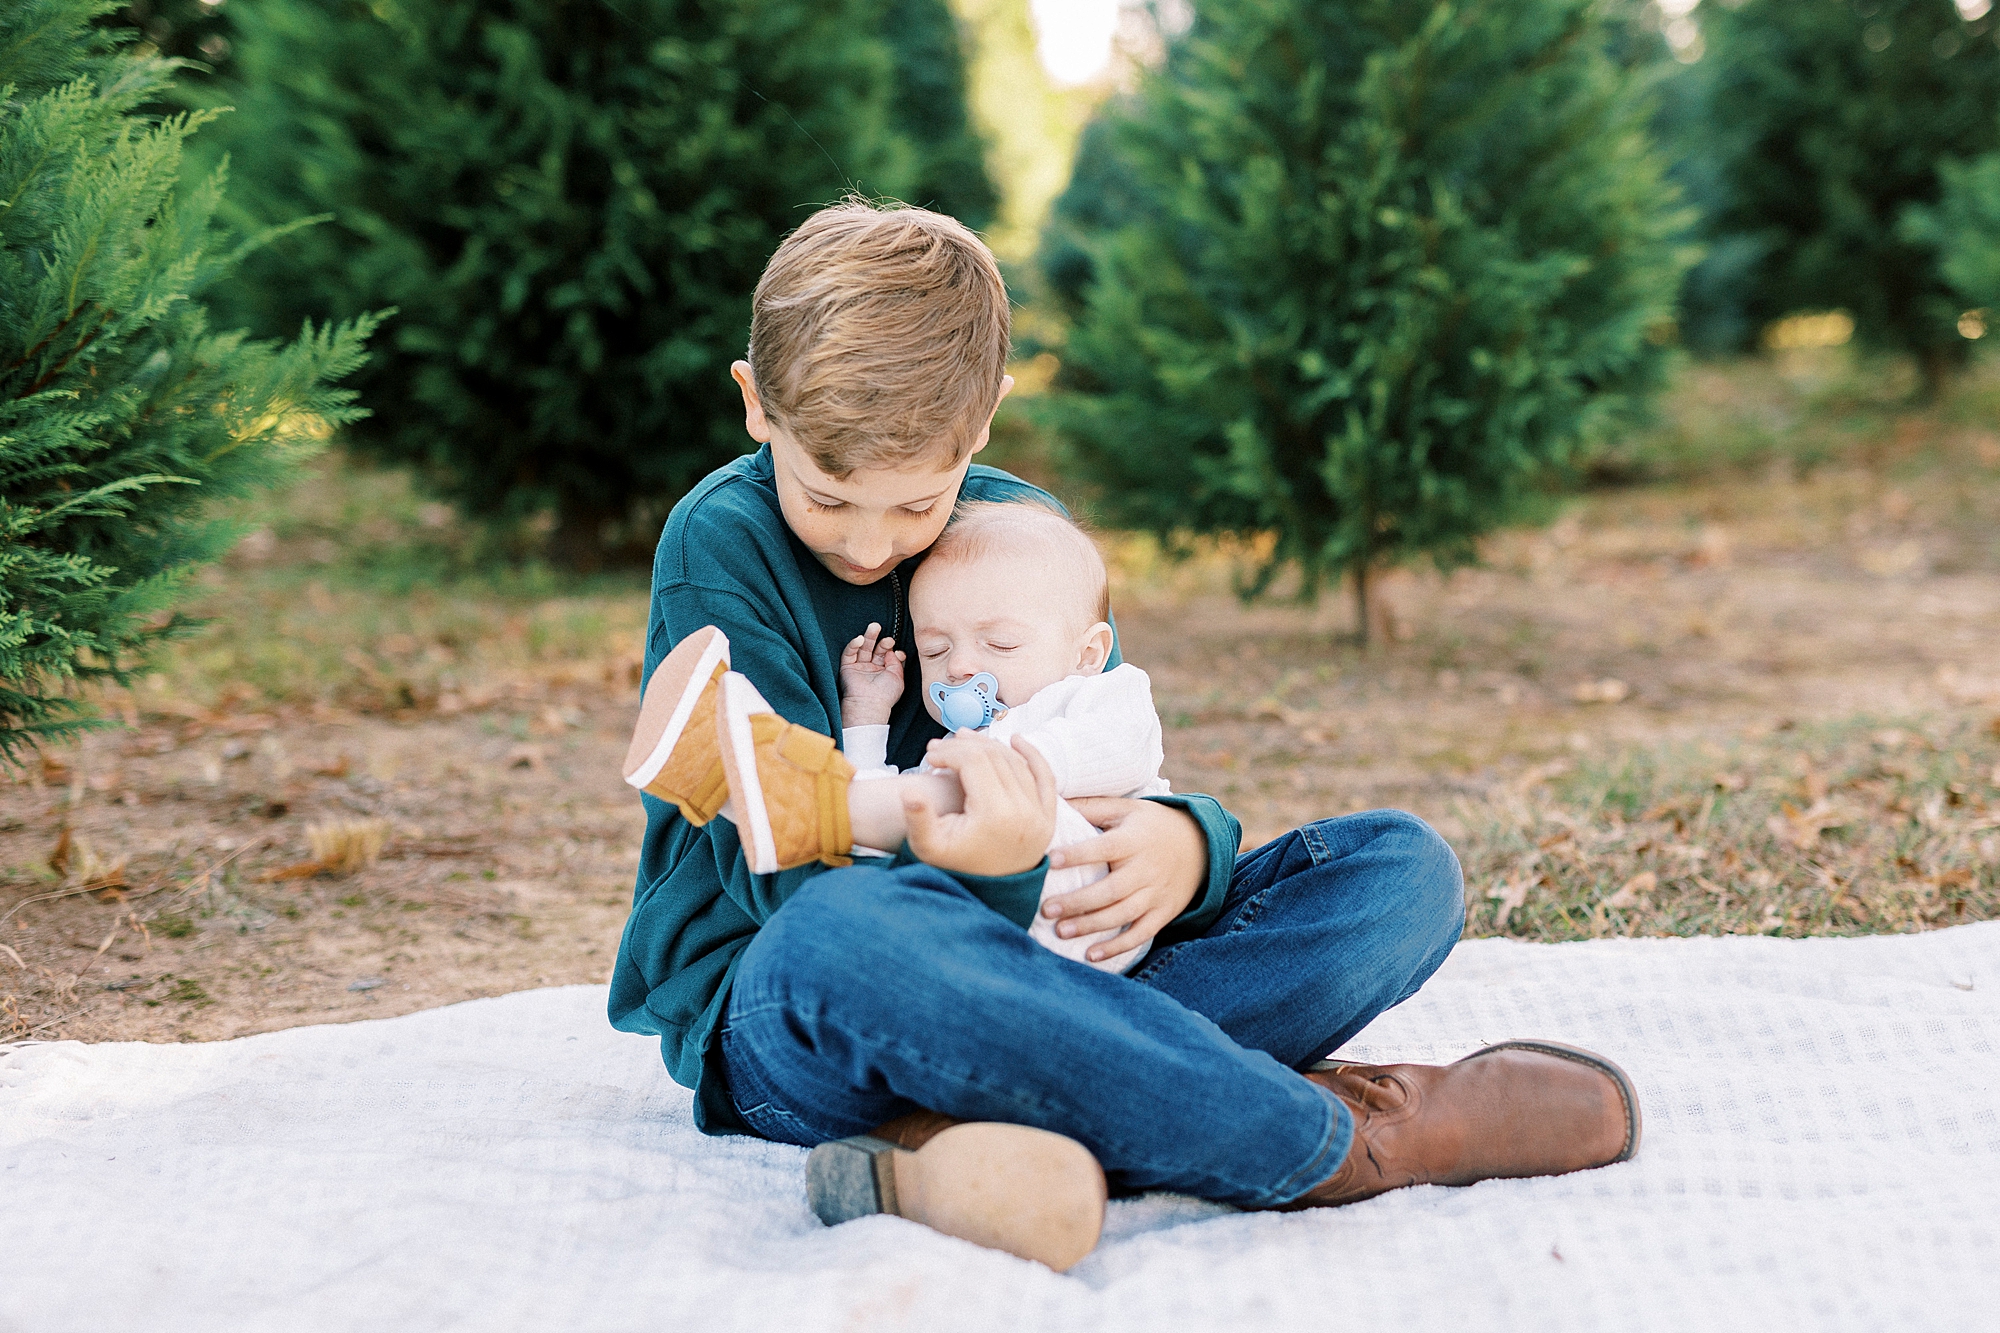 bother rocks baby in lap on white blanket between trees at Almond Christmas Tree Farm